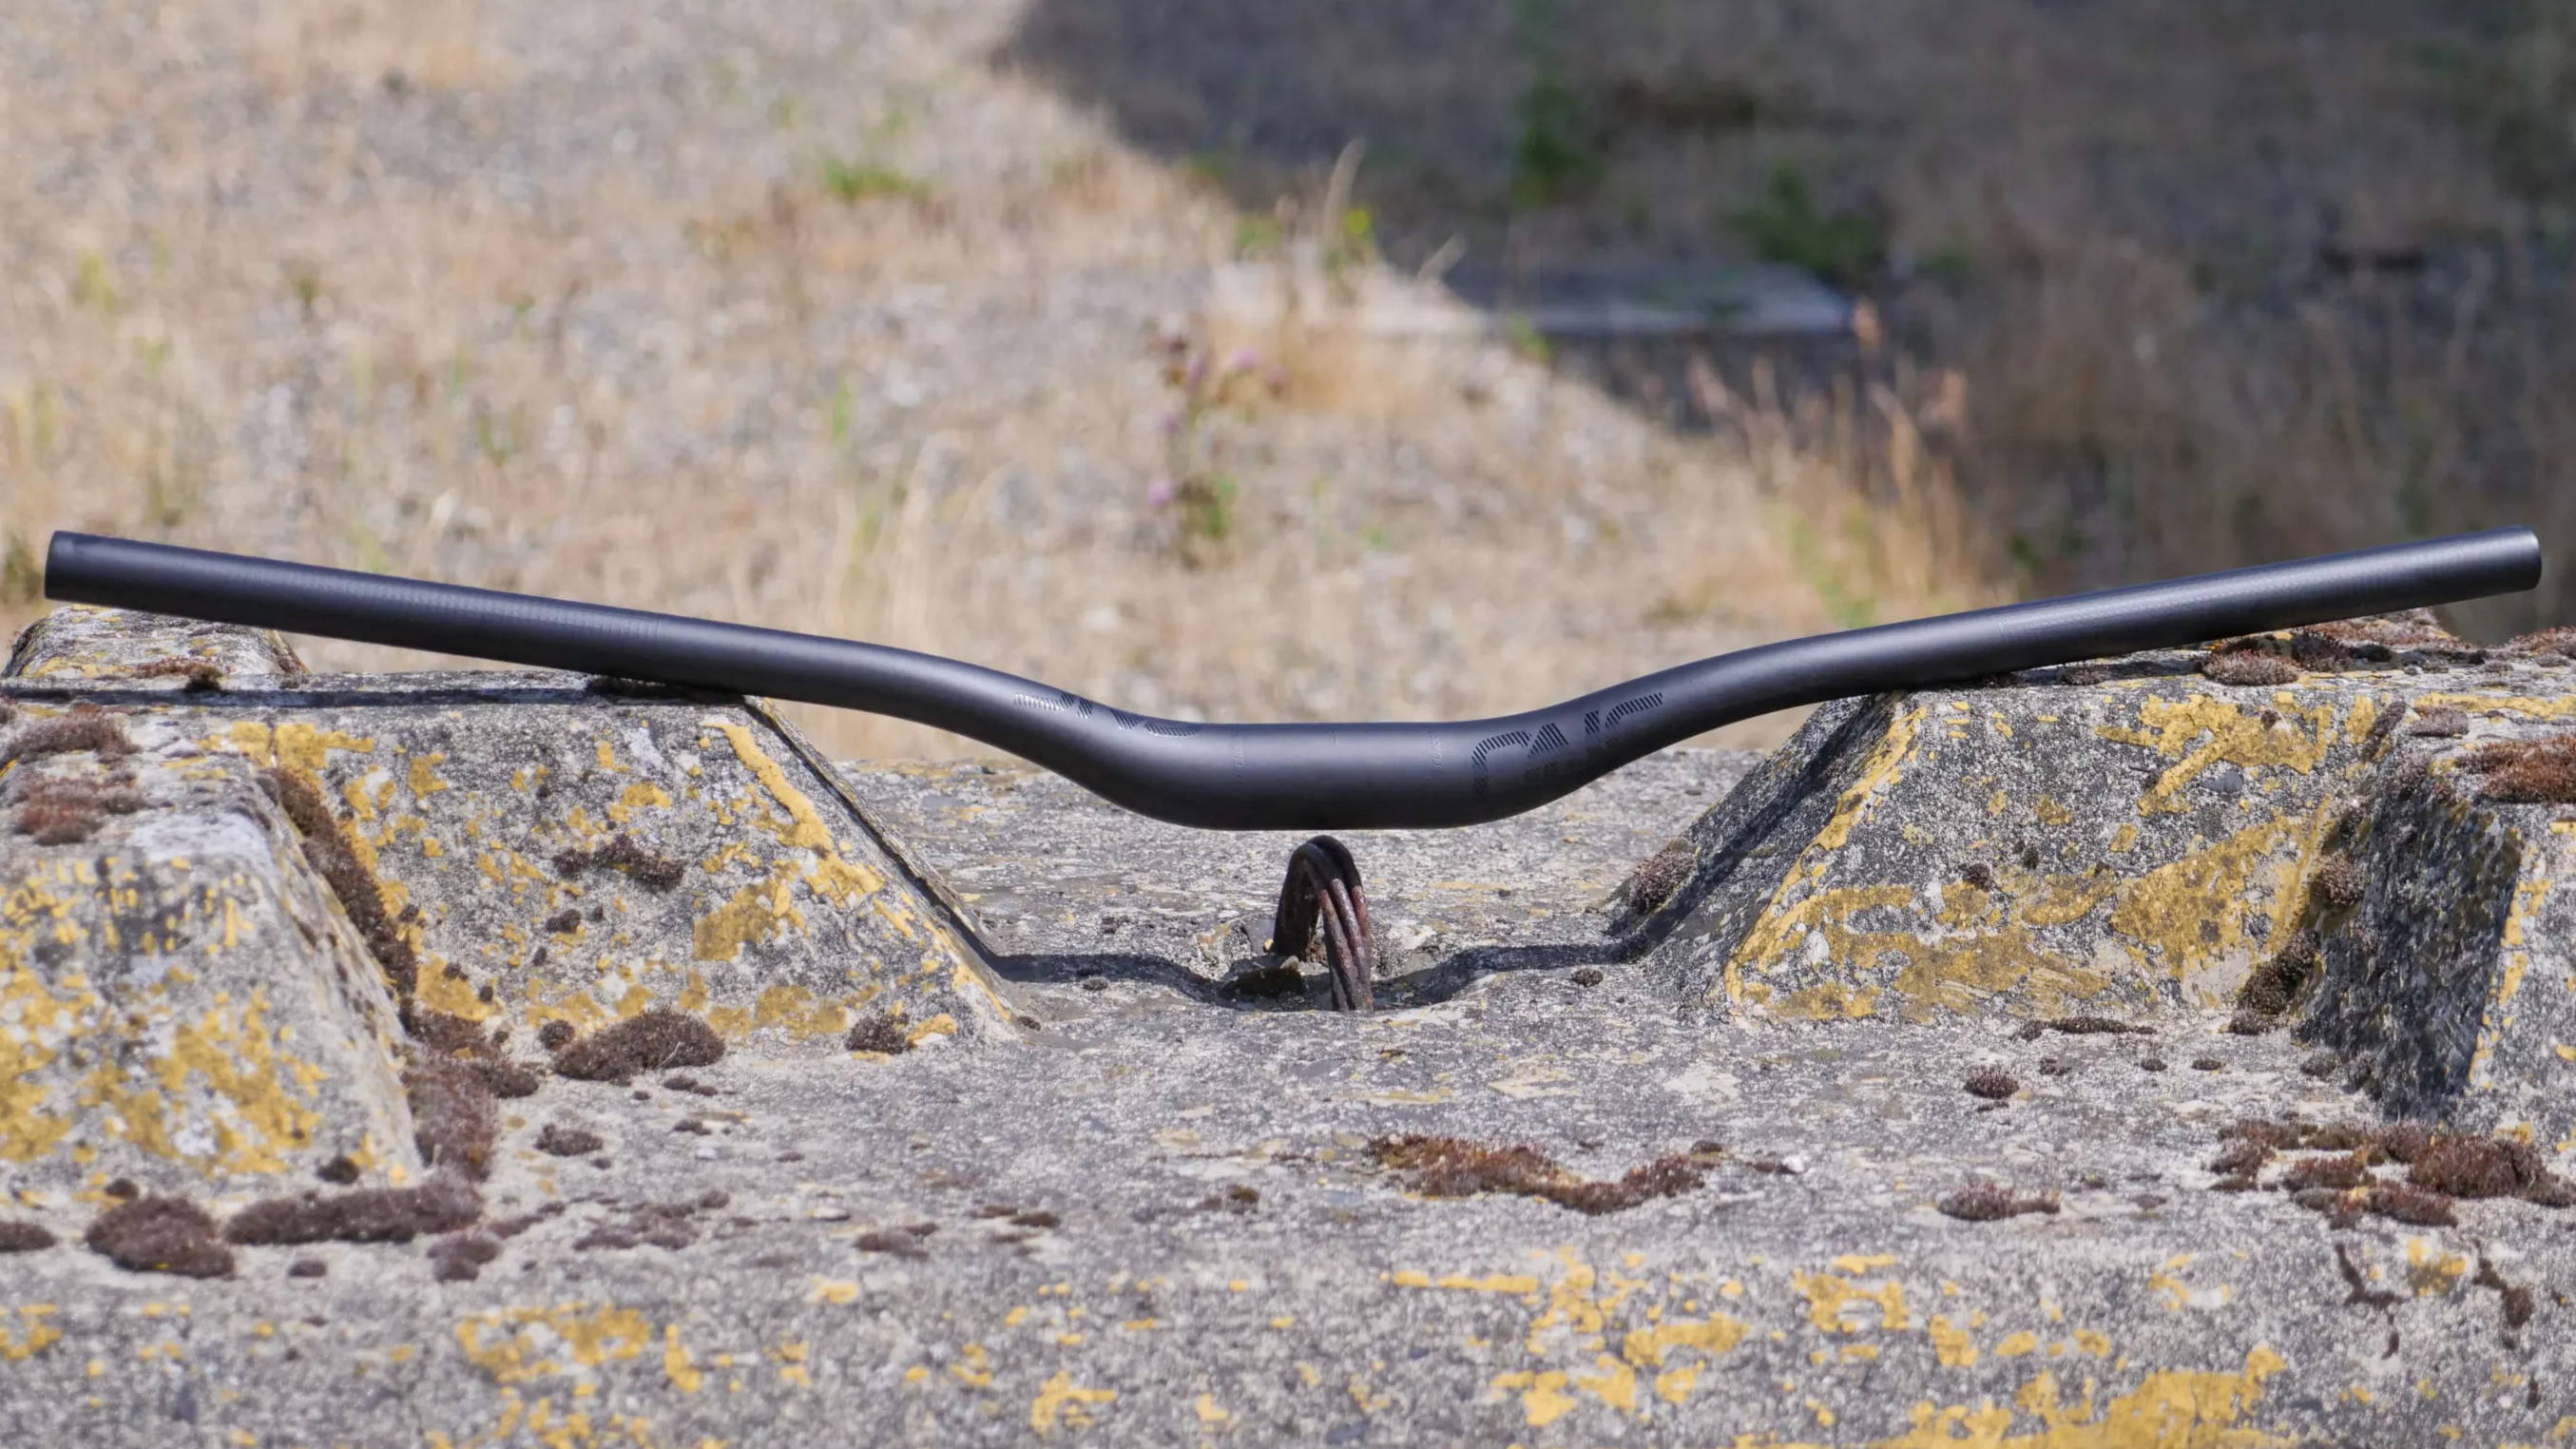 oneup components carbon handlebars with 35mm rise set on a jersey barrier